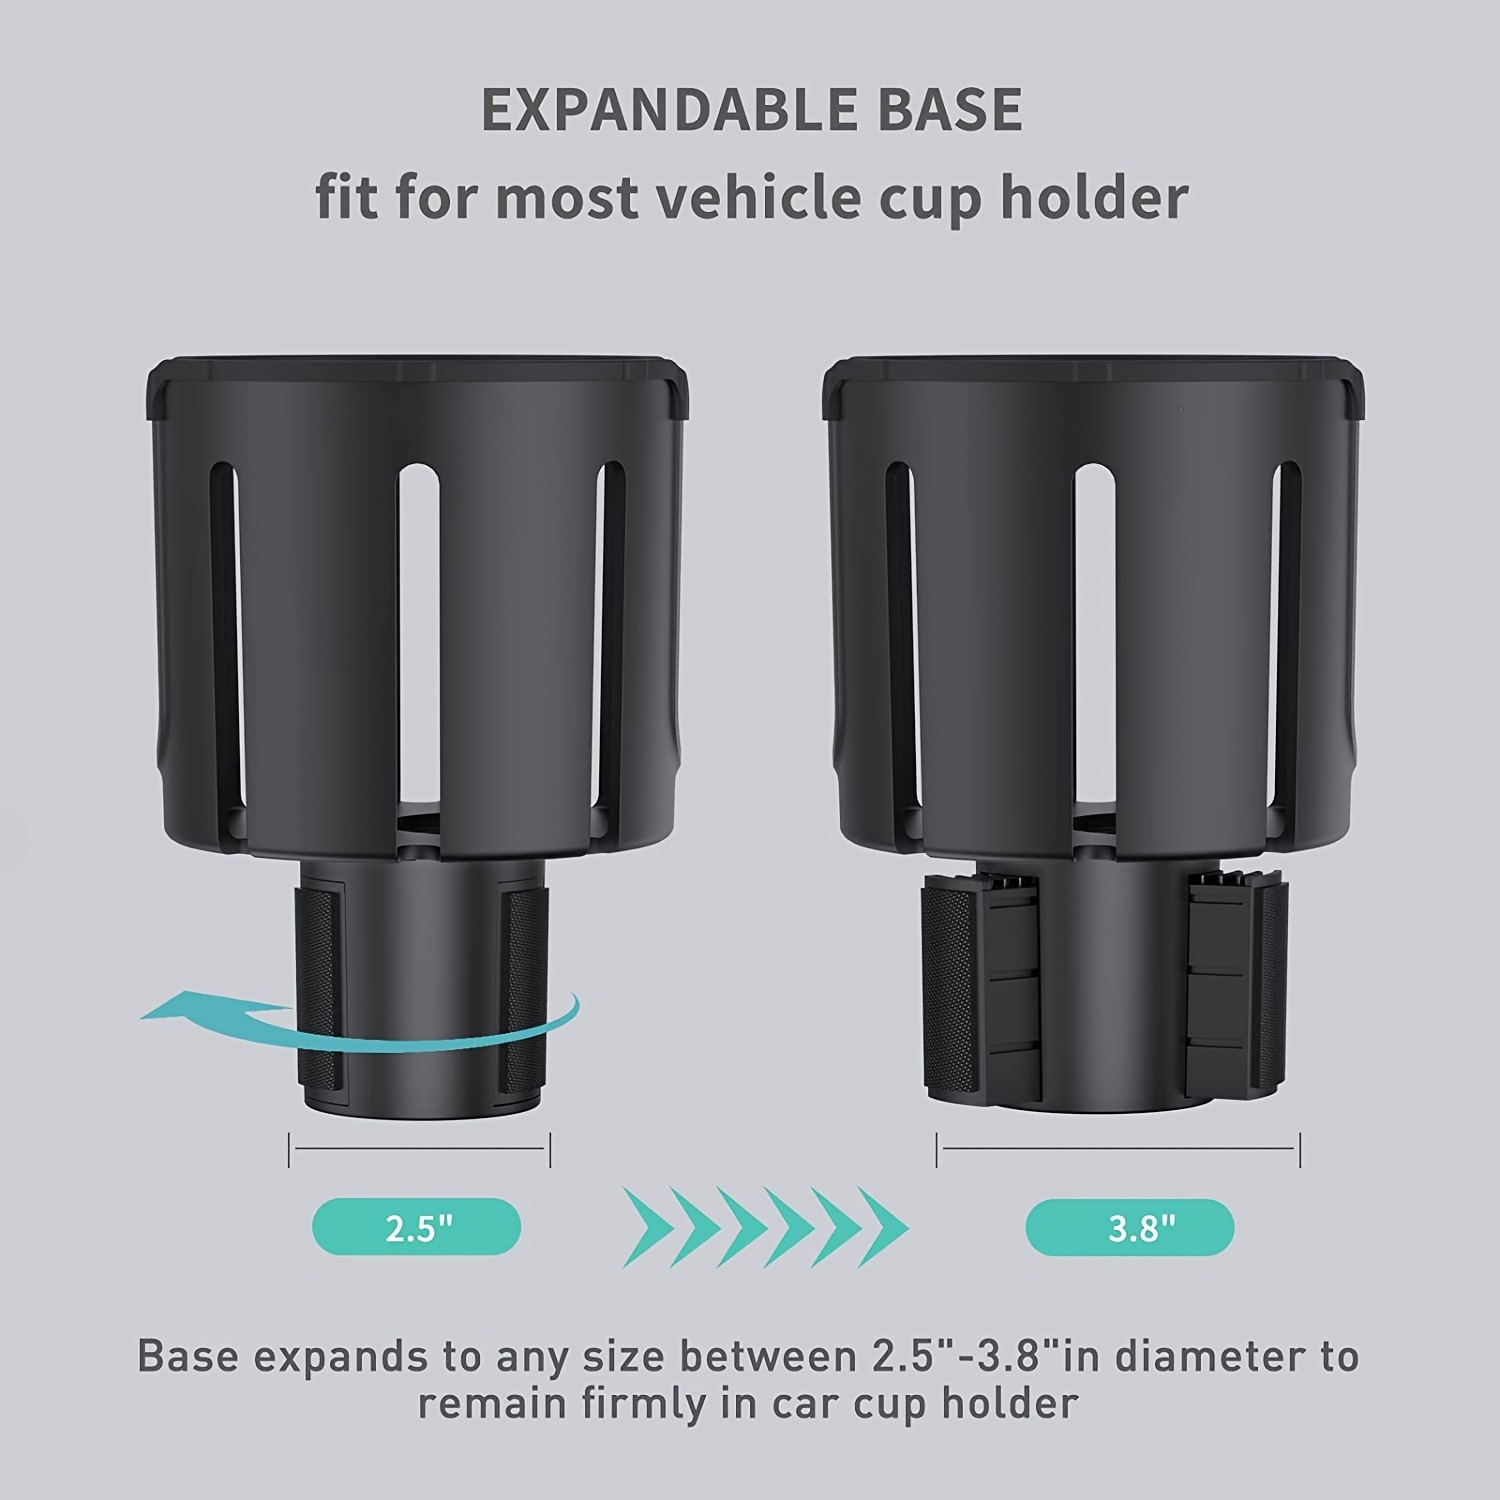 Upgrade Your Car Cup Holder With This Adjustable Expander - Fits